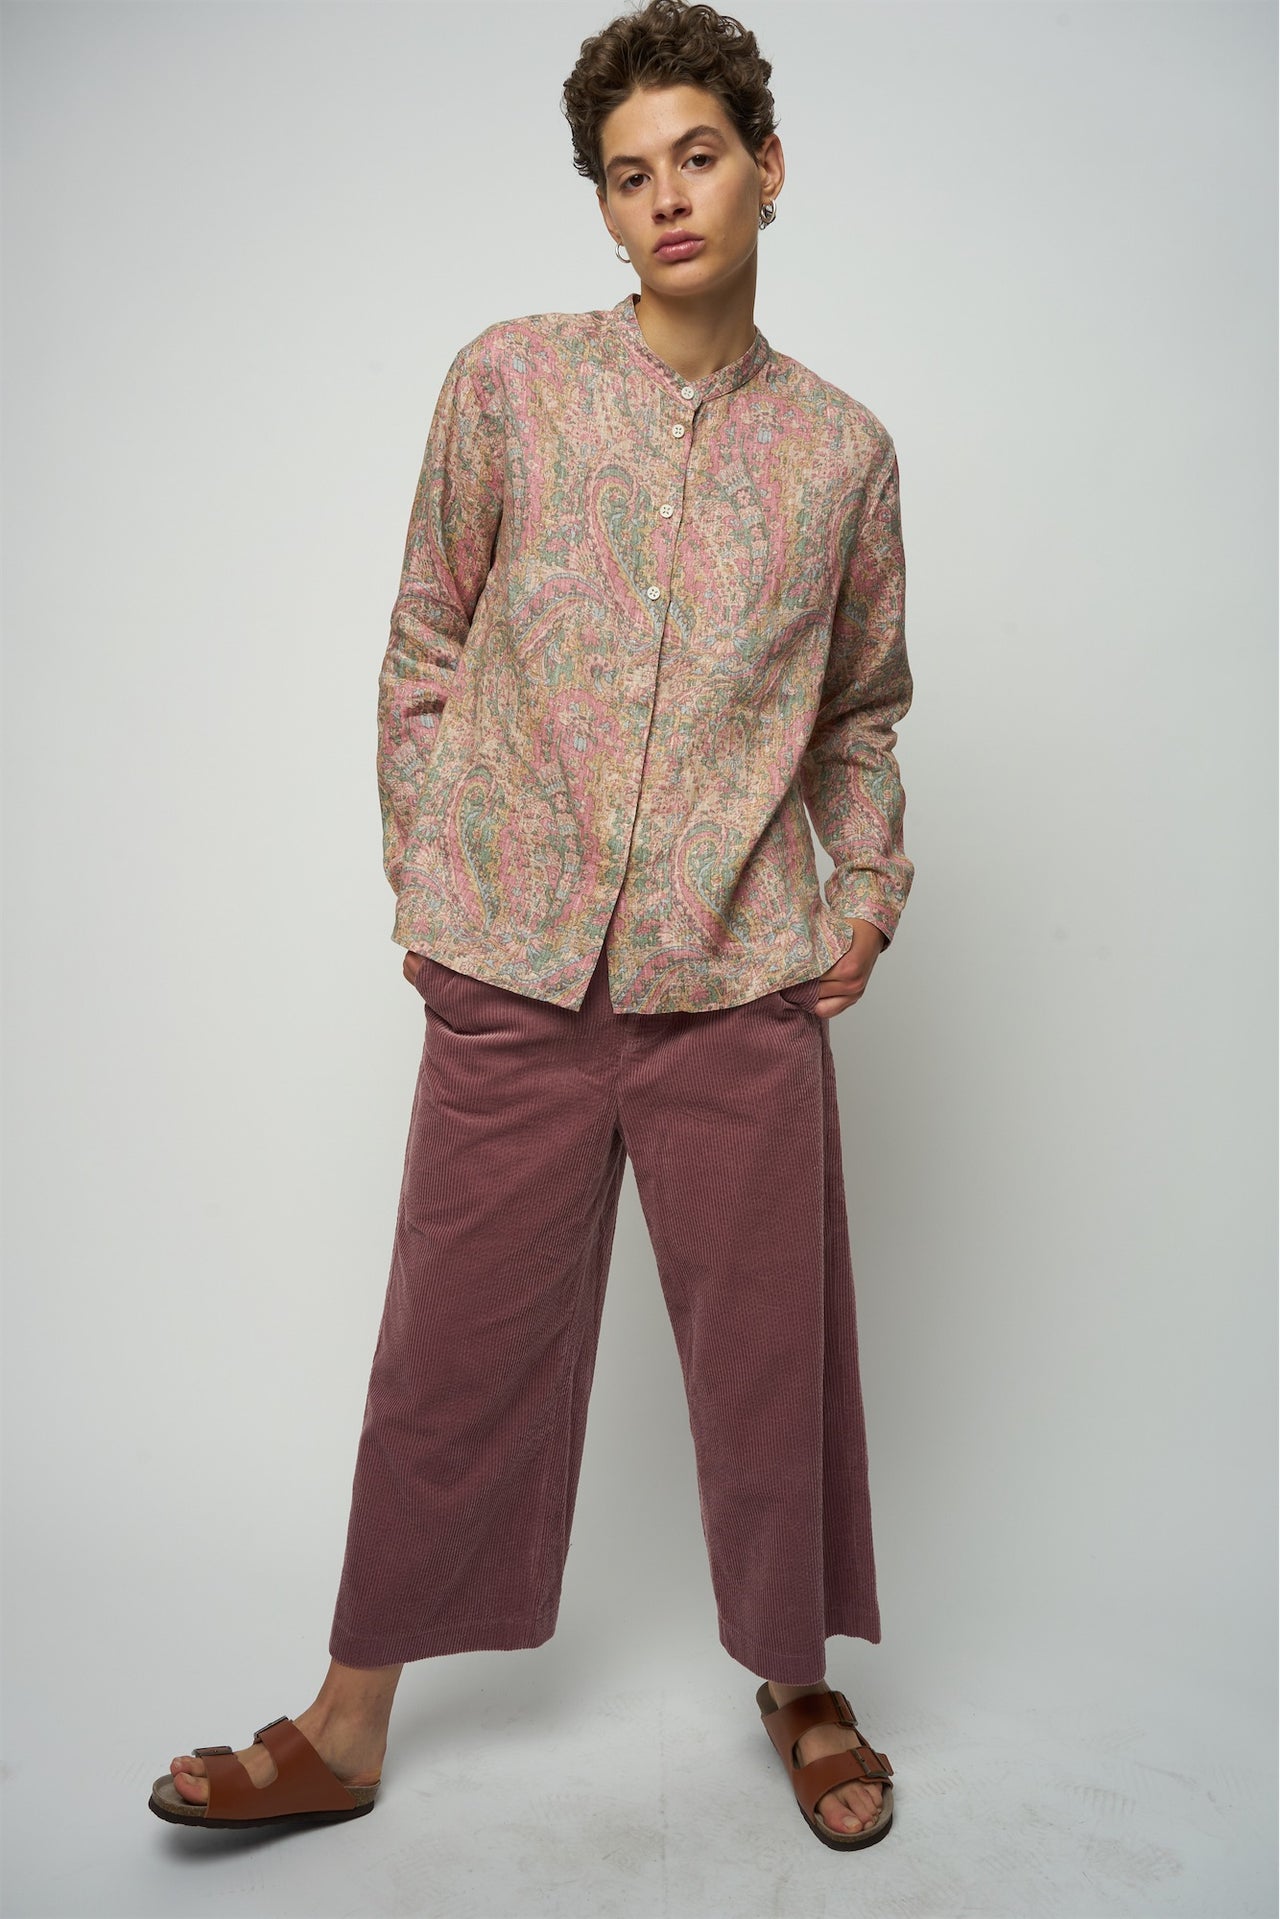 Zen Shirt in a Pink, Green and Beige Shaded Paisley Design Japanese Linen